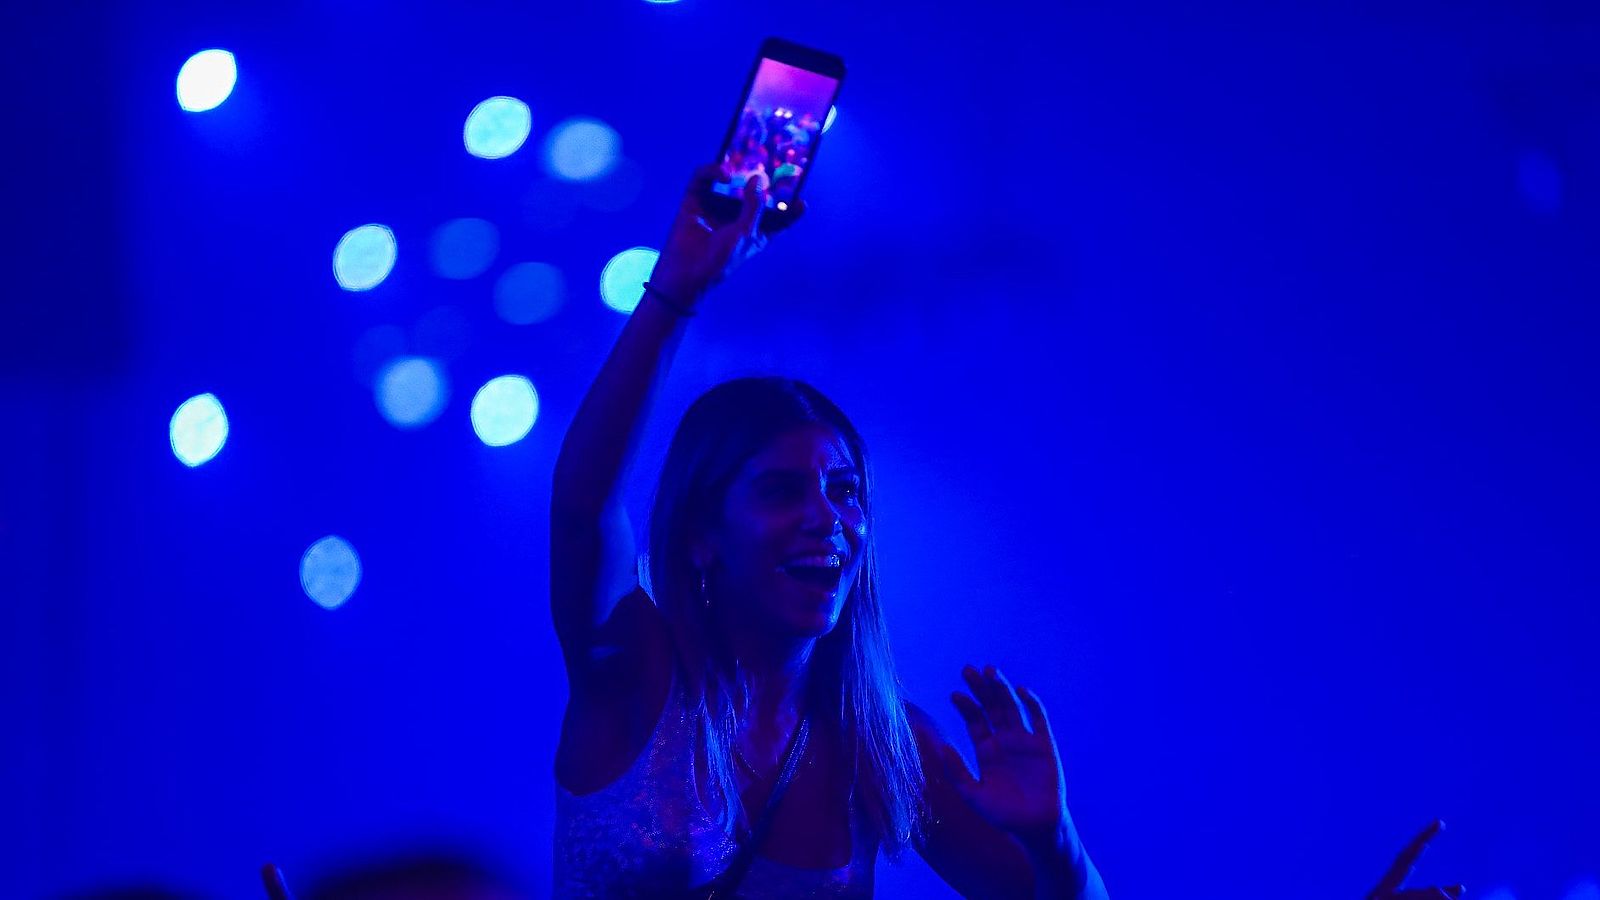 The best smartphone apps for your next visit at the festival